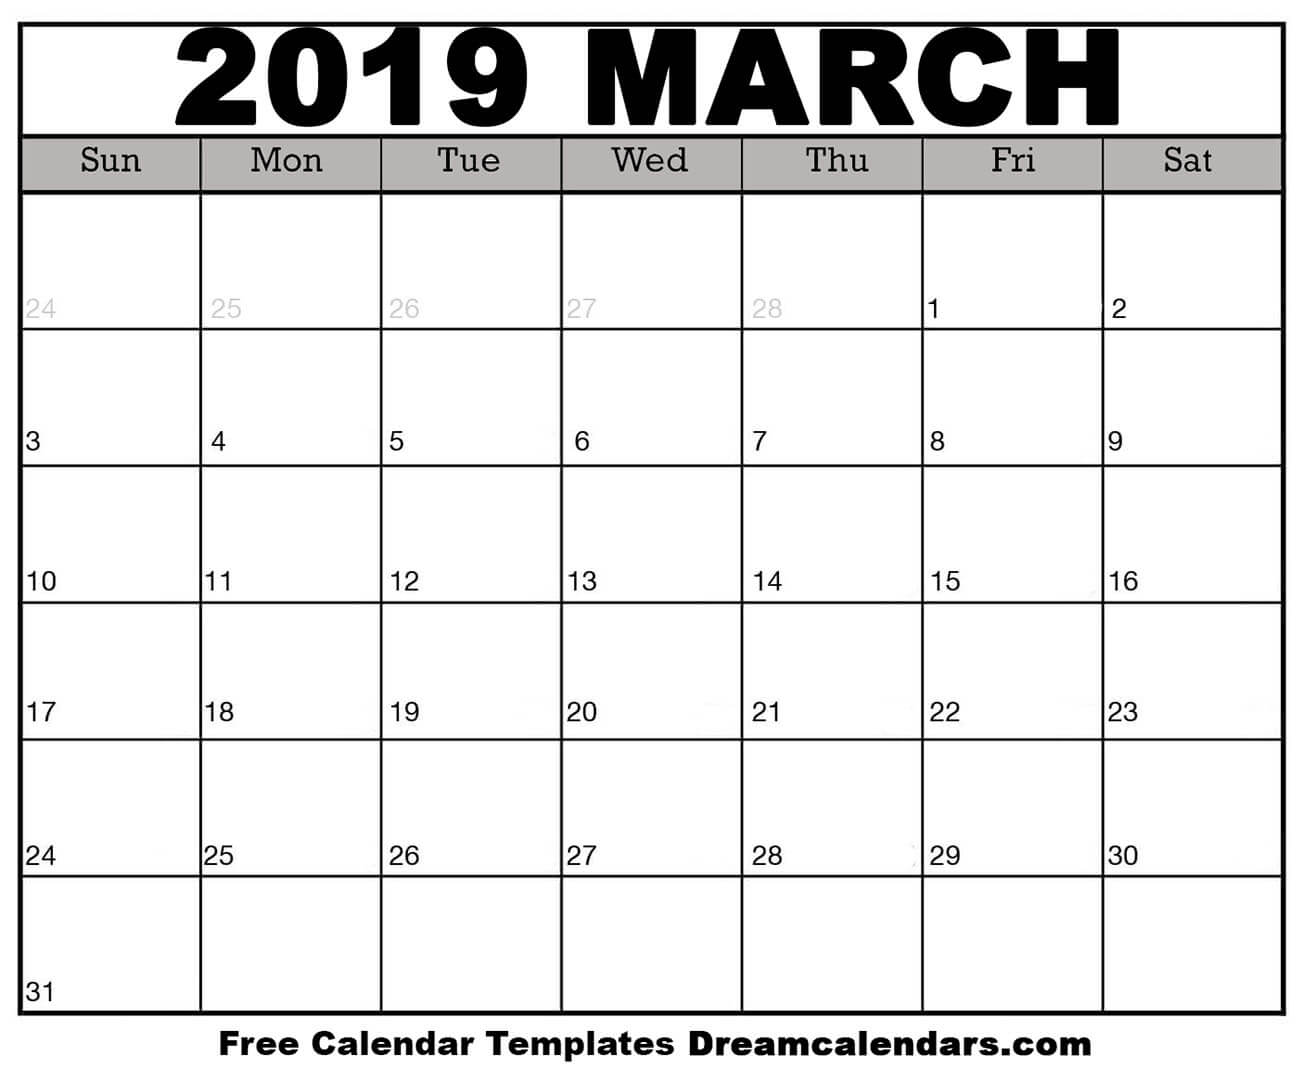 March 2019 Calendar Free Blank Printable With Holidays